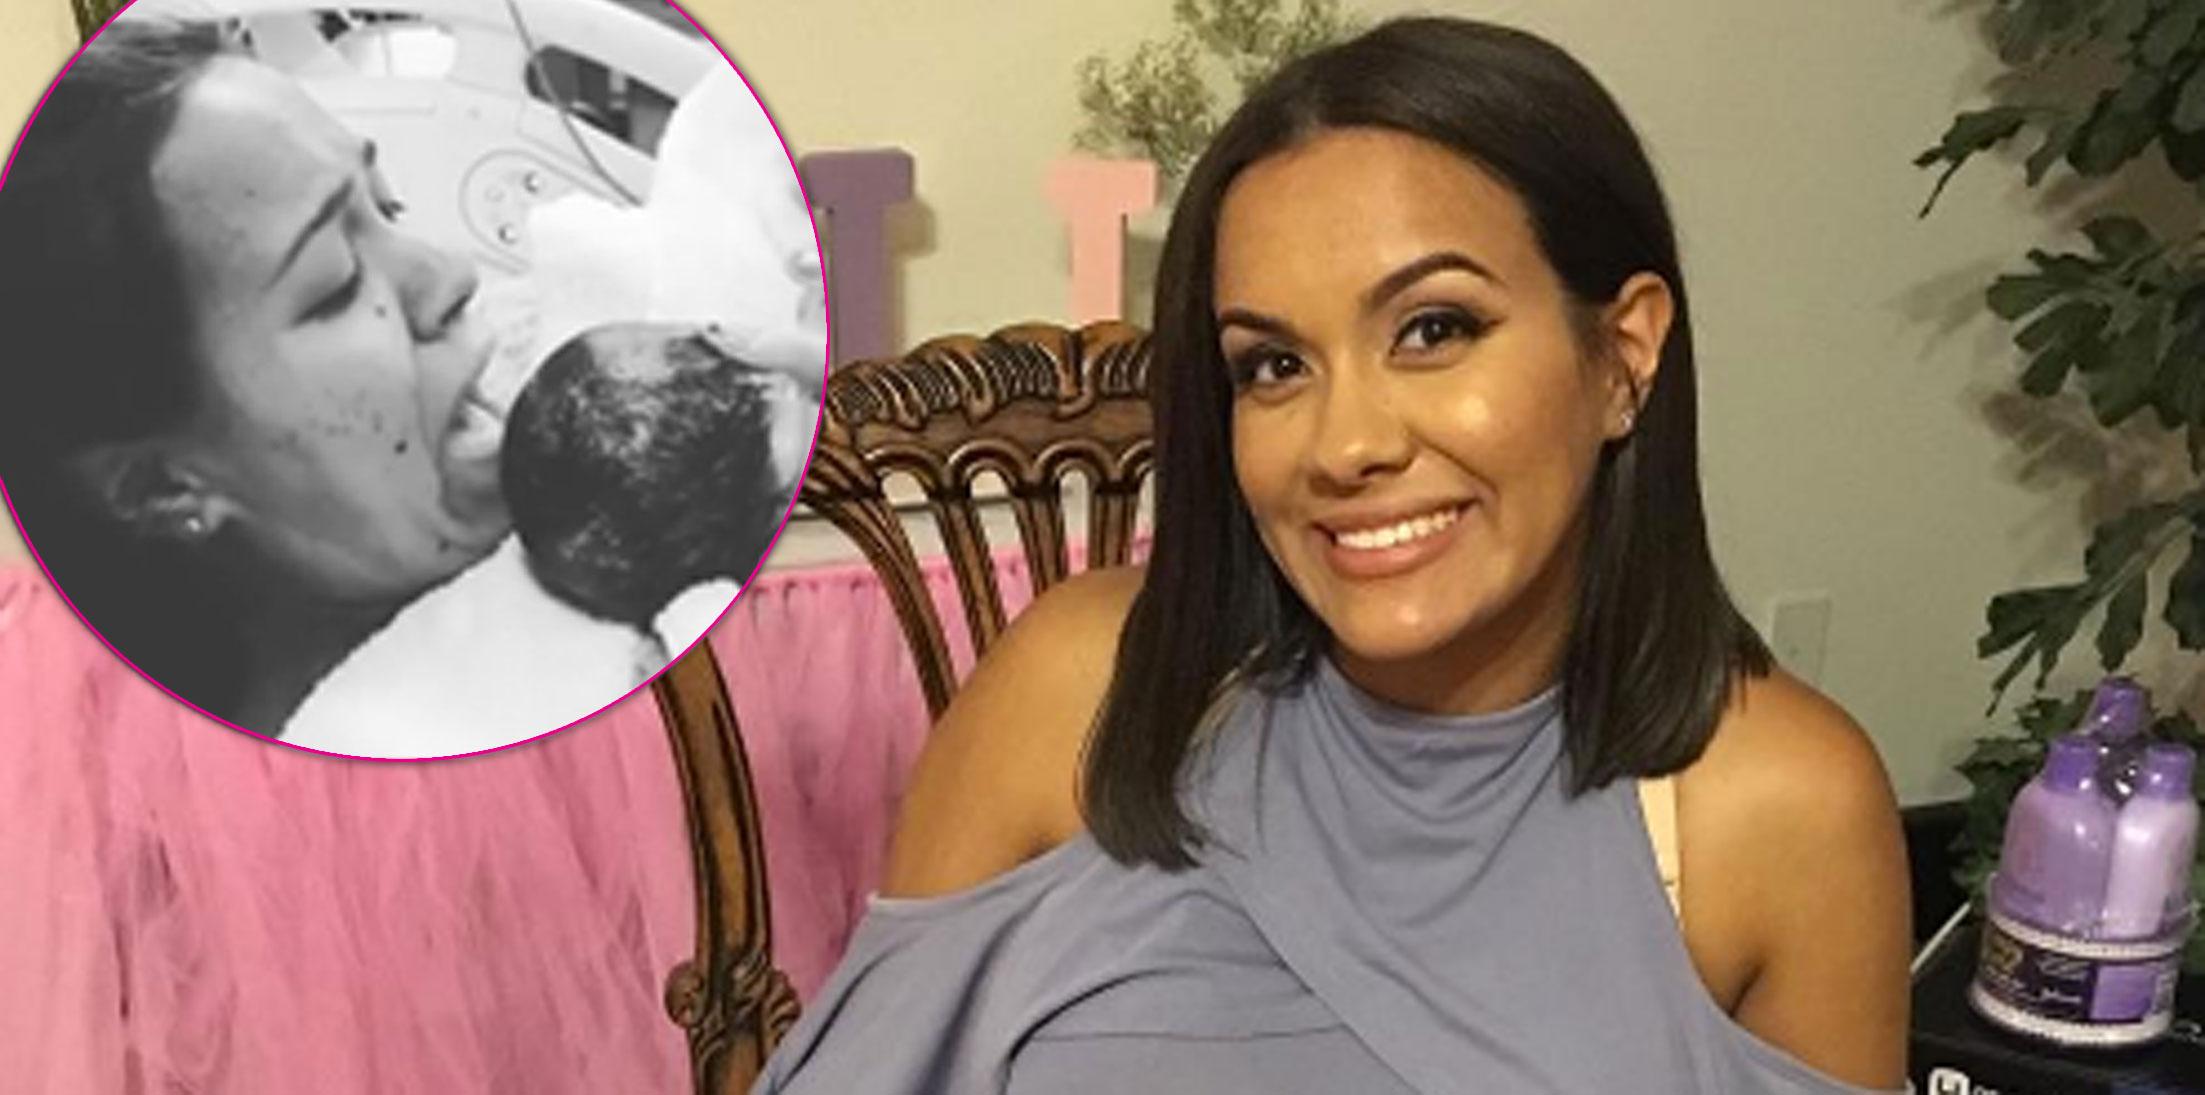 Video See Teen Mom 2 Star Briana Dejesus Give Birth To Daughter